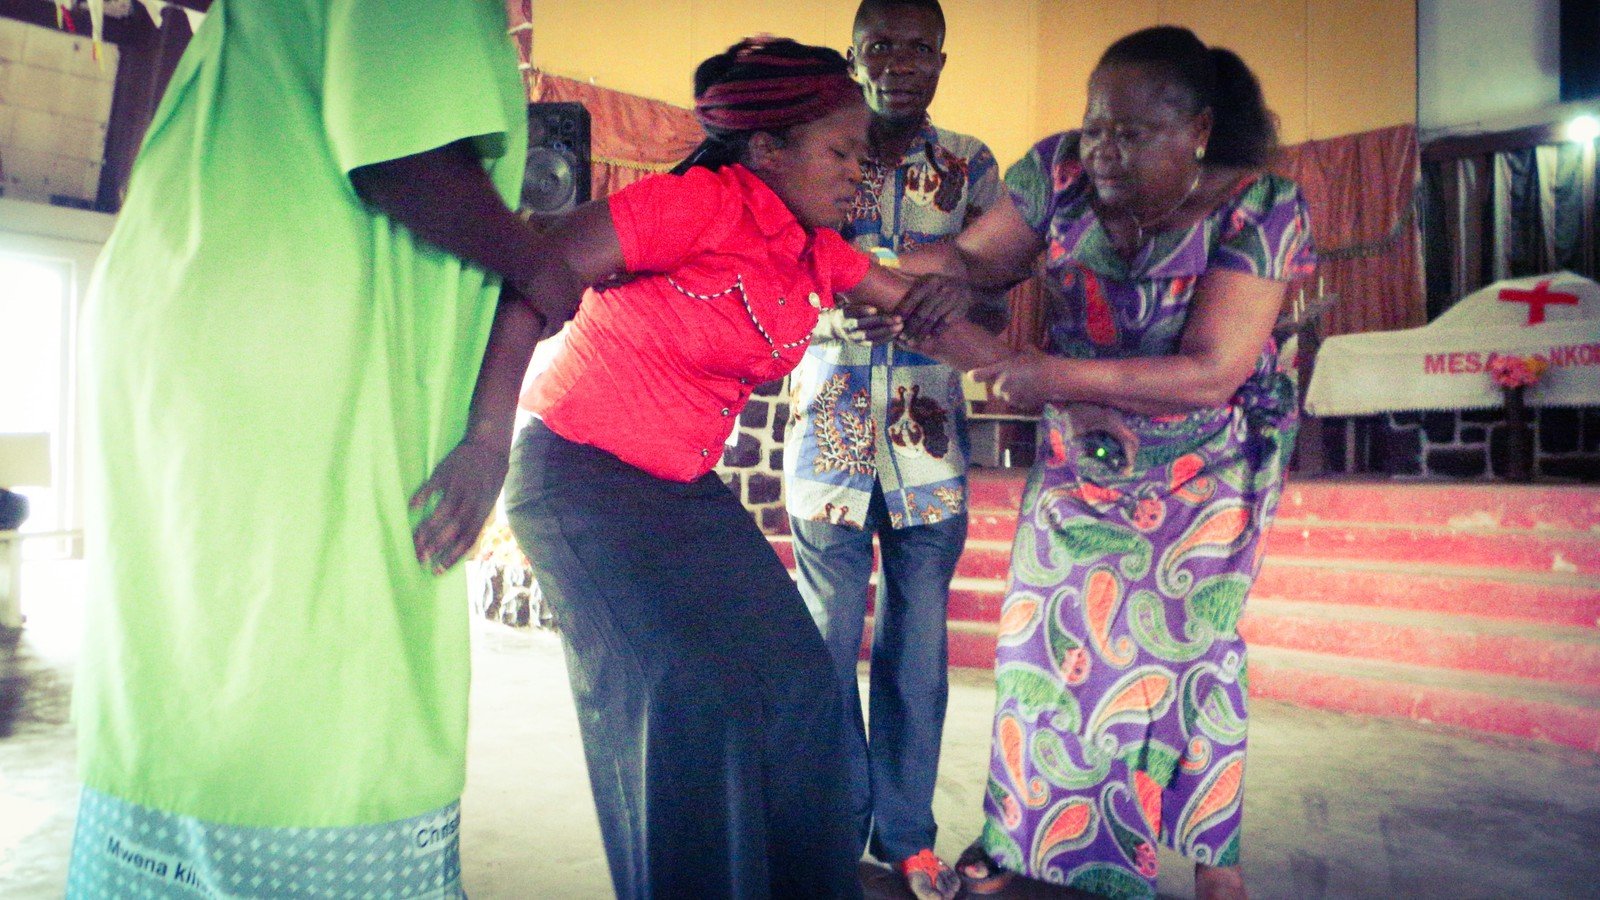 This group of women volunteers are putting on a play to increase awareness about the Ebola virus in a church in DRC. (Photo: Oxfam)